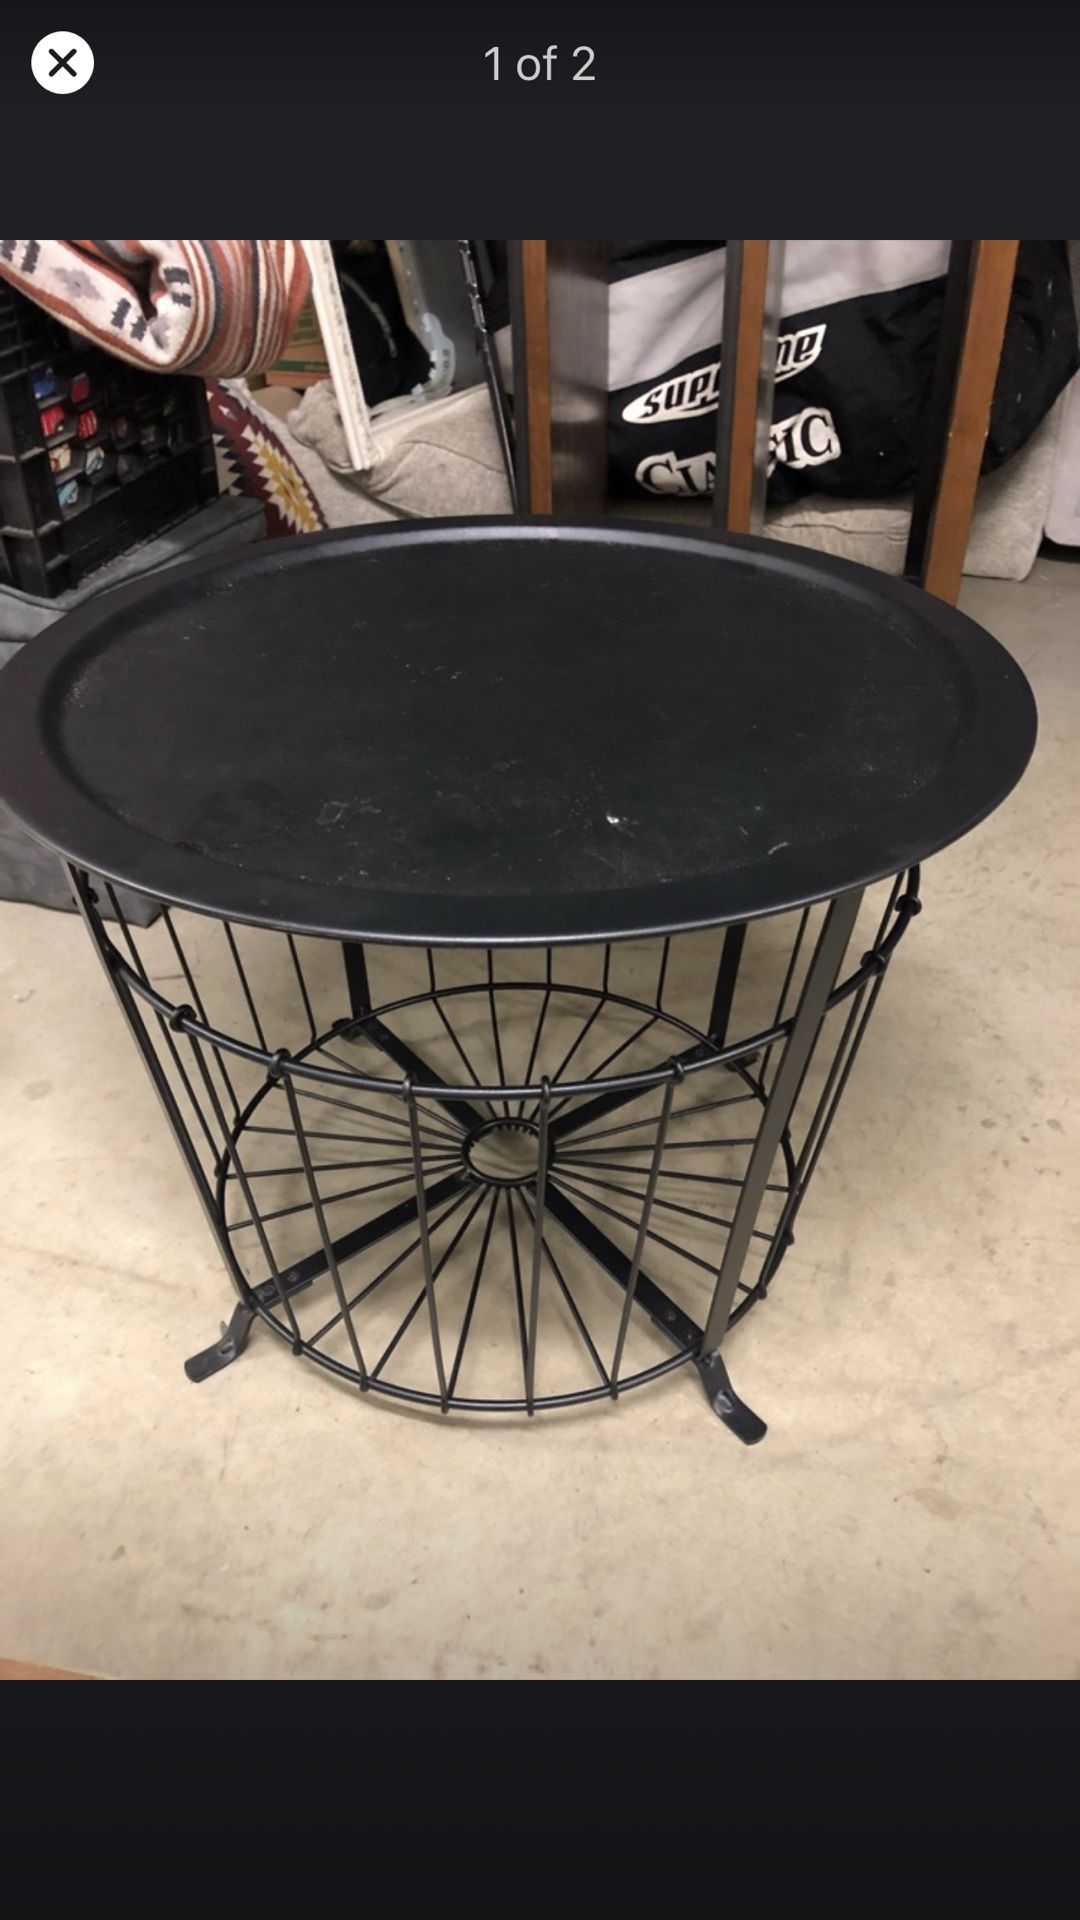 Small coffee table/large side table with storage